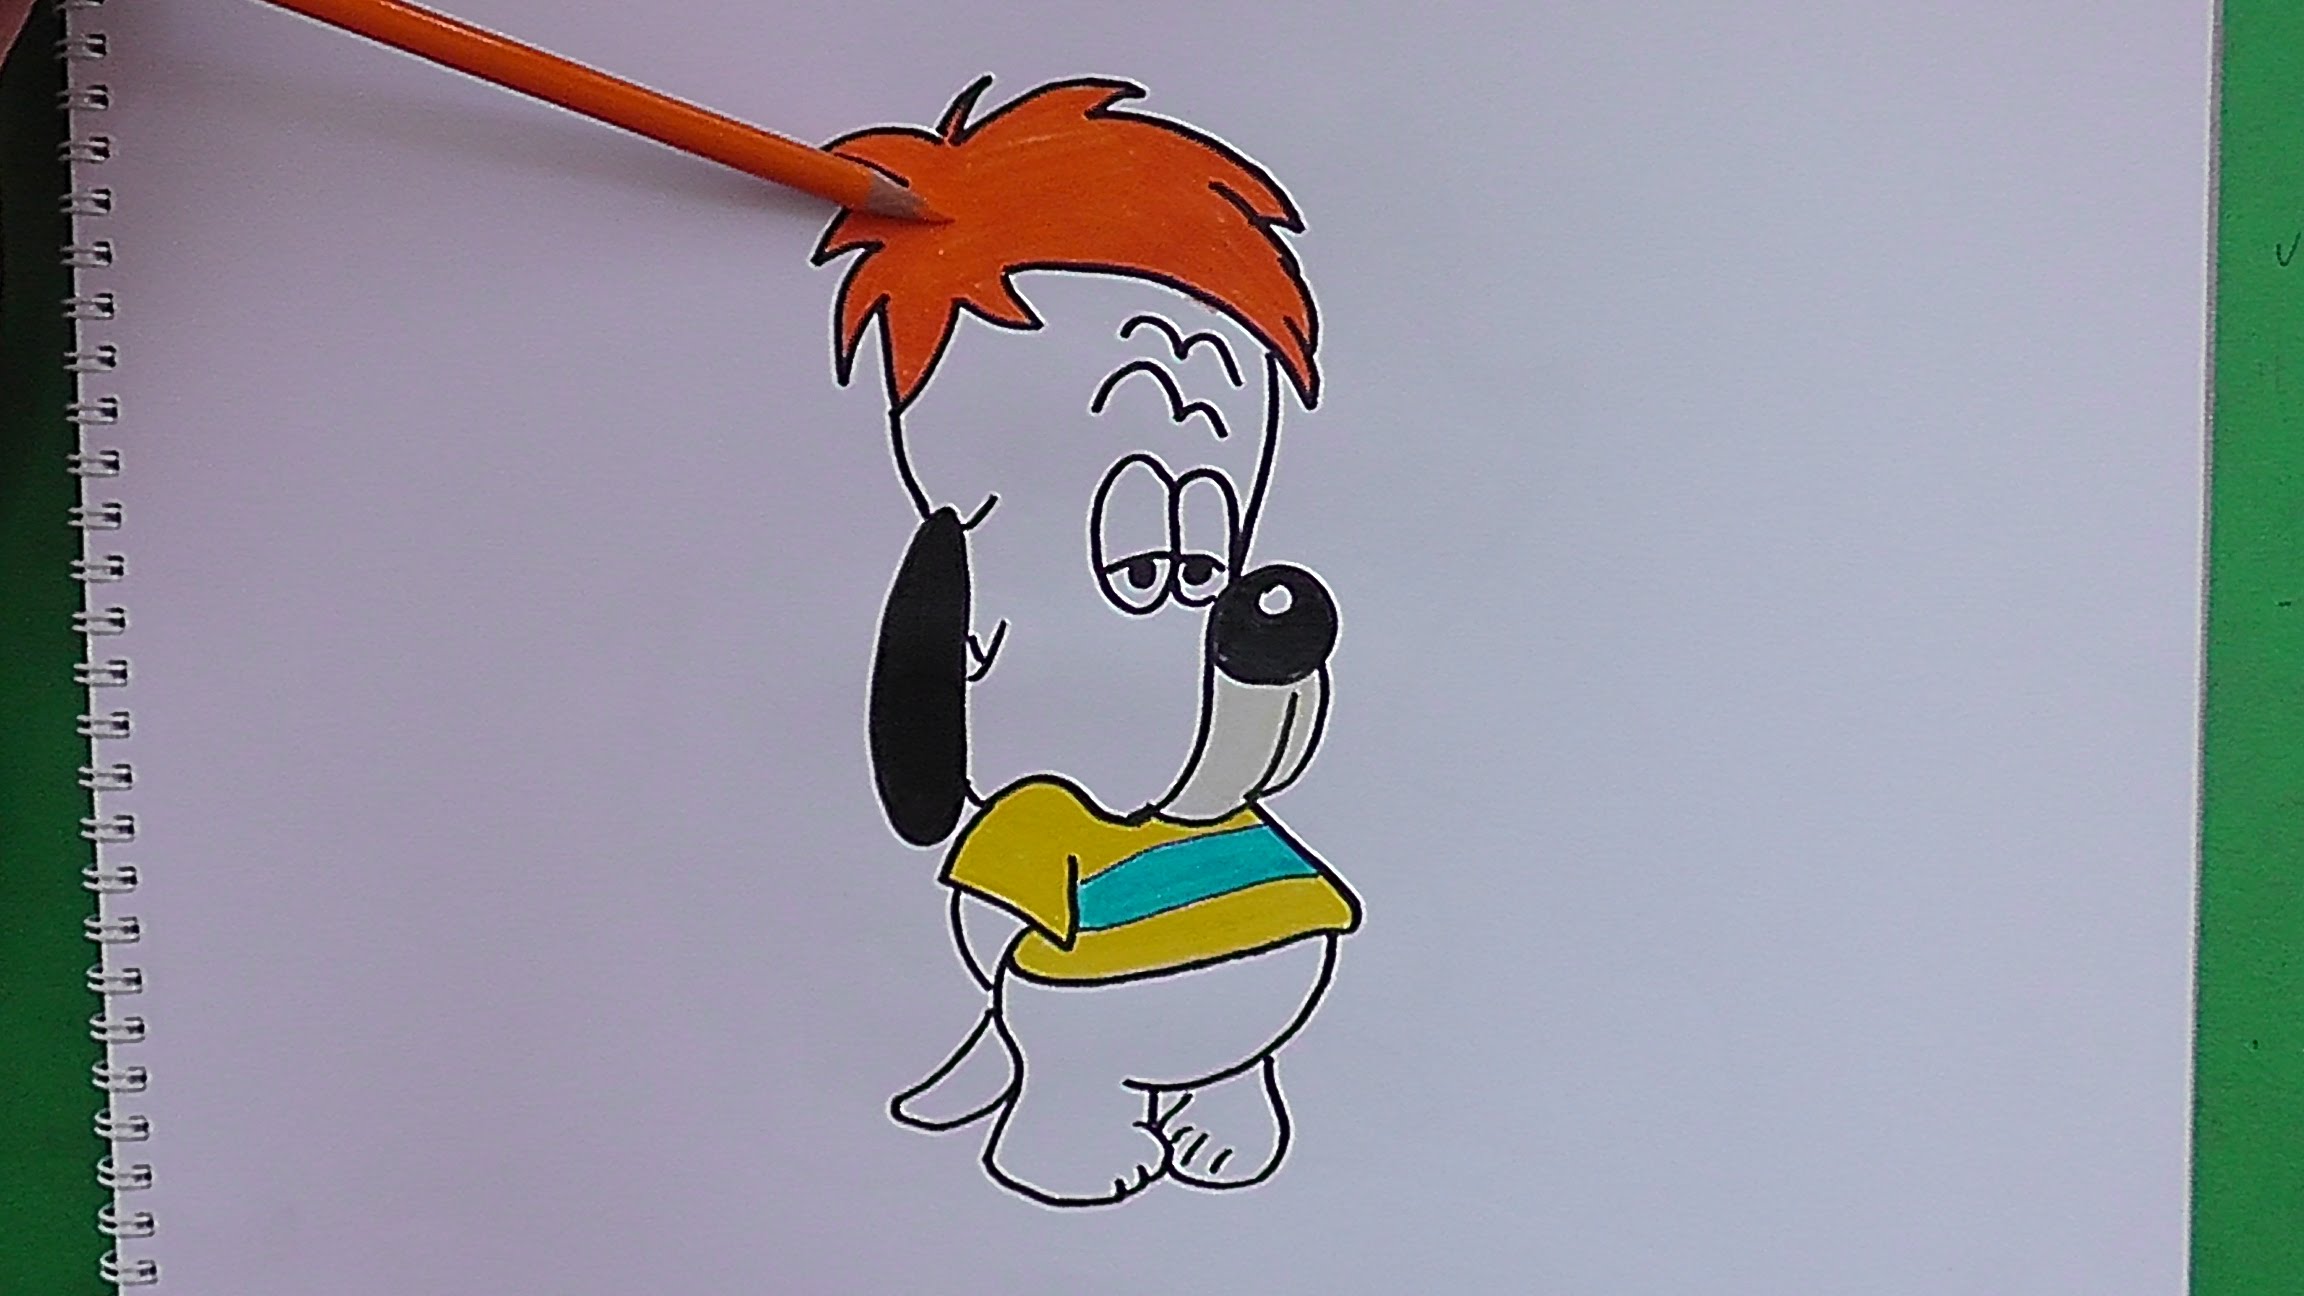 Droopy background